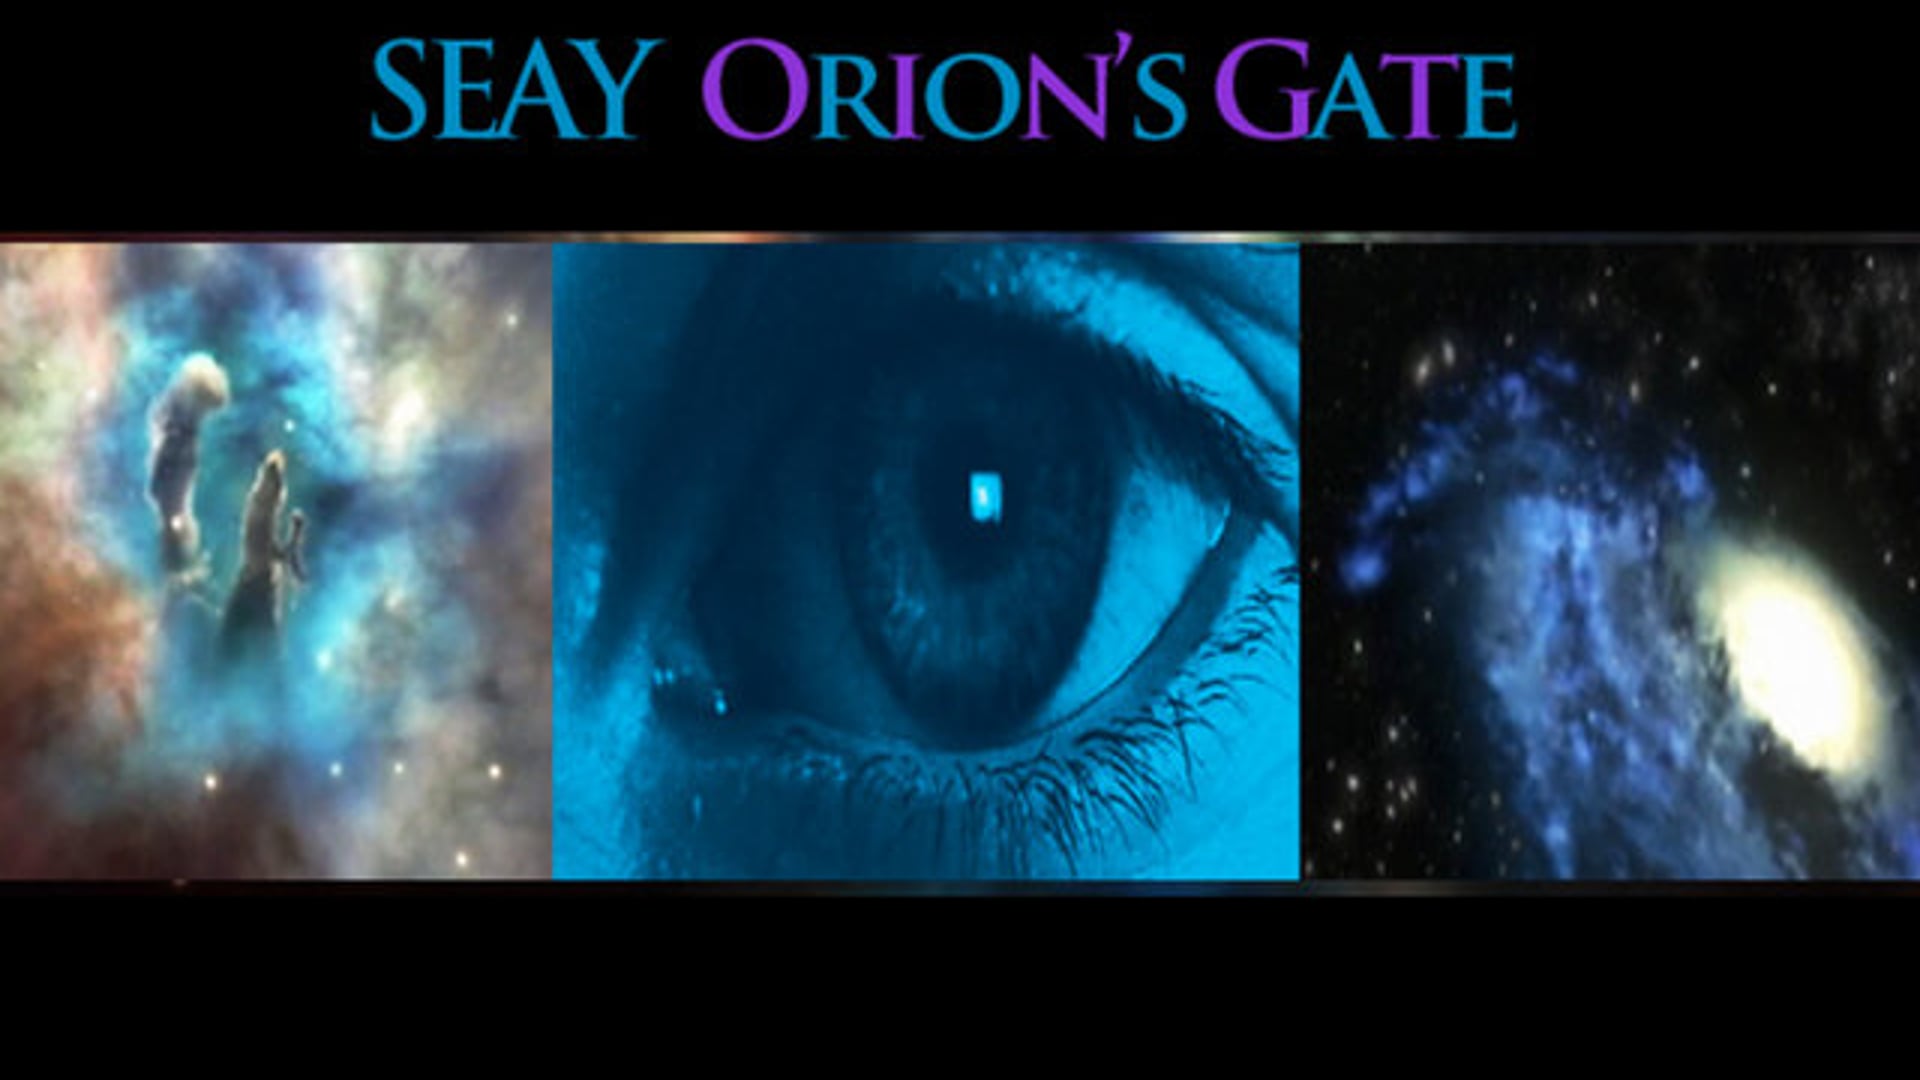 SEAY - ORION'S GATE